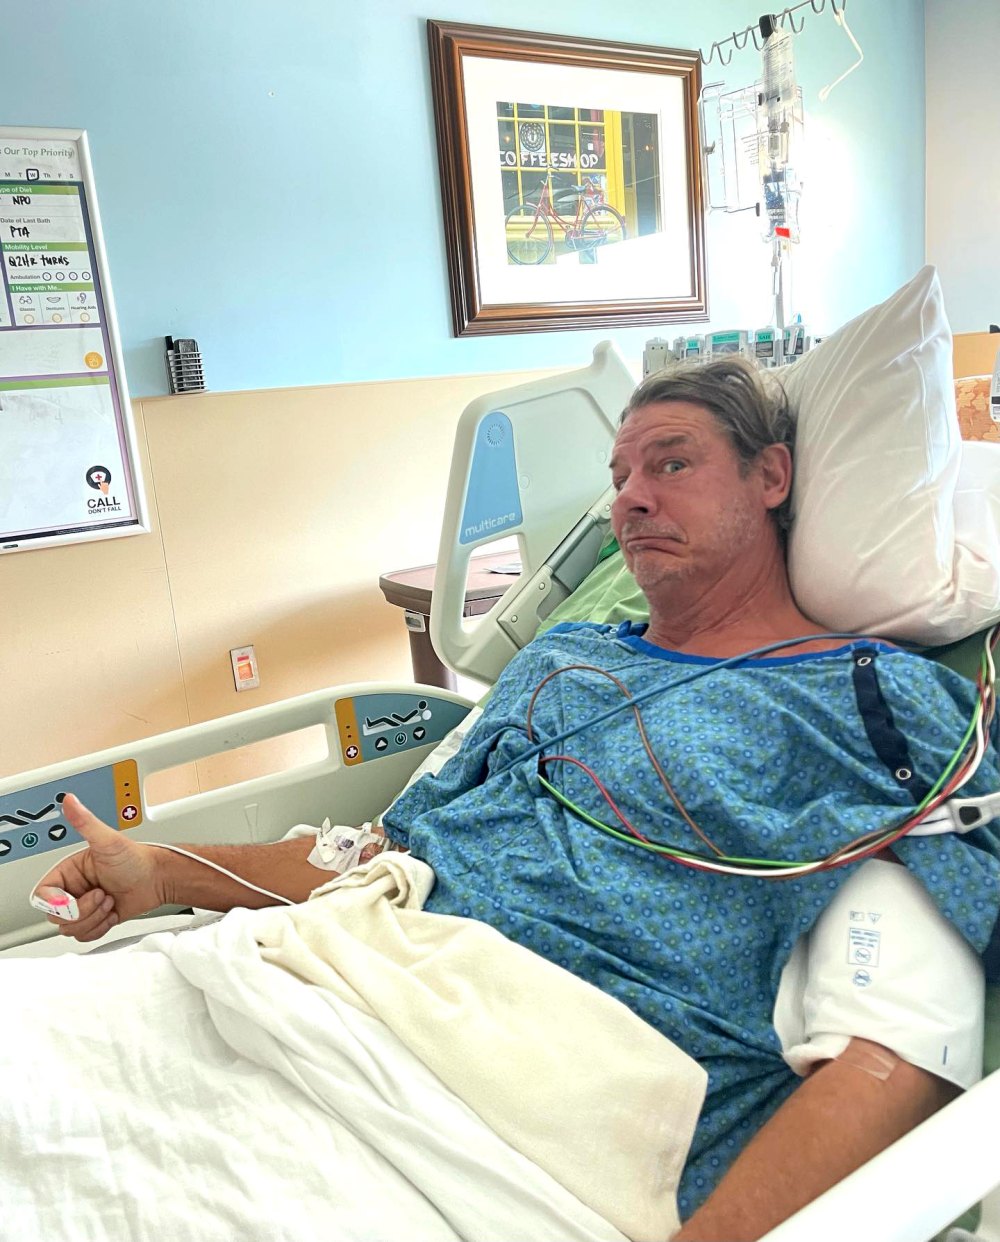 Ty Pennington Released From the ICU After Surgery for Abscess That Was 'Closing Off My Airway'